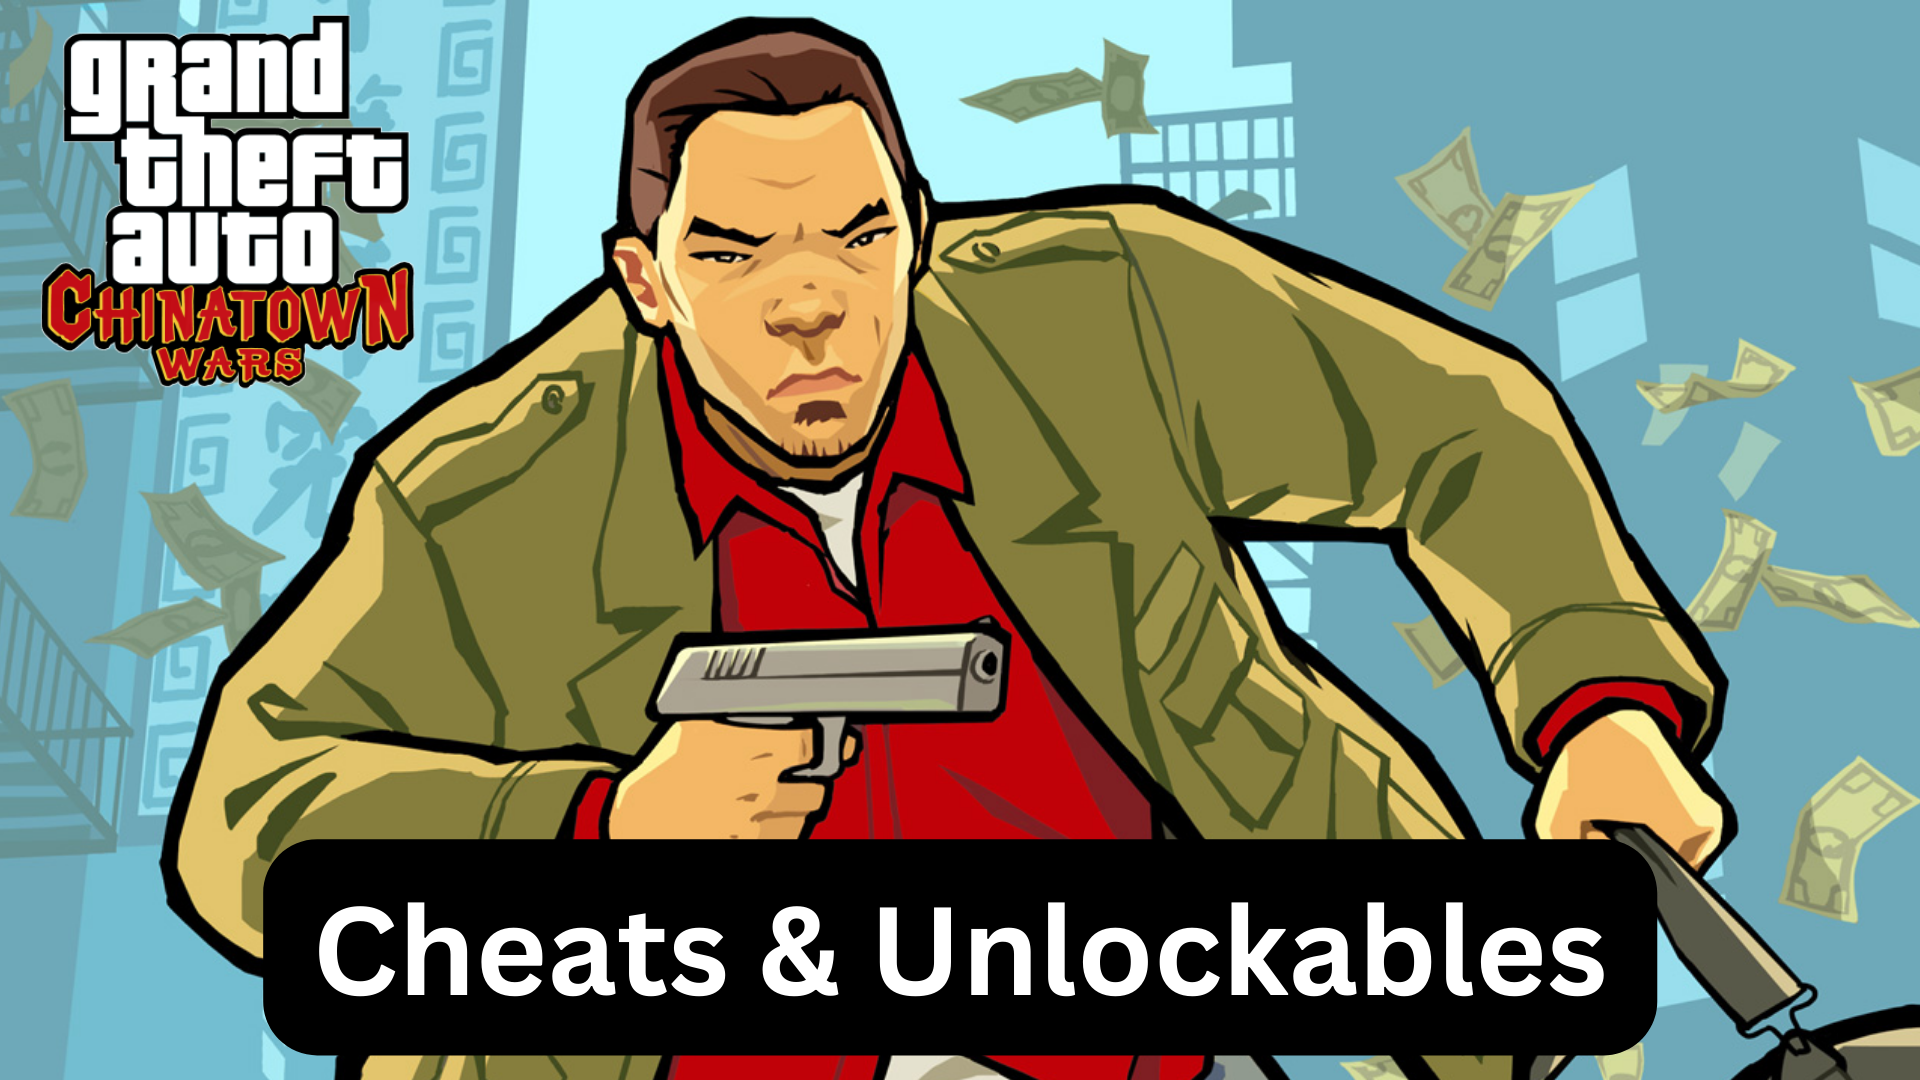 grand theft auto chinatown wars cheats and unlockables